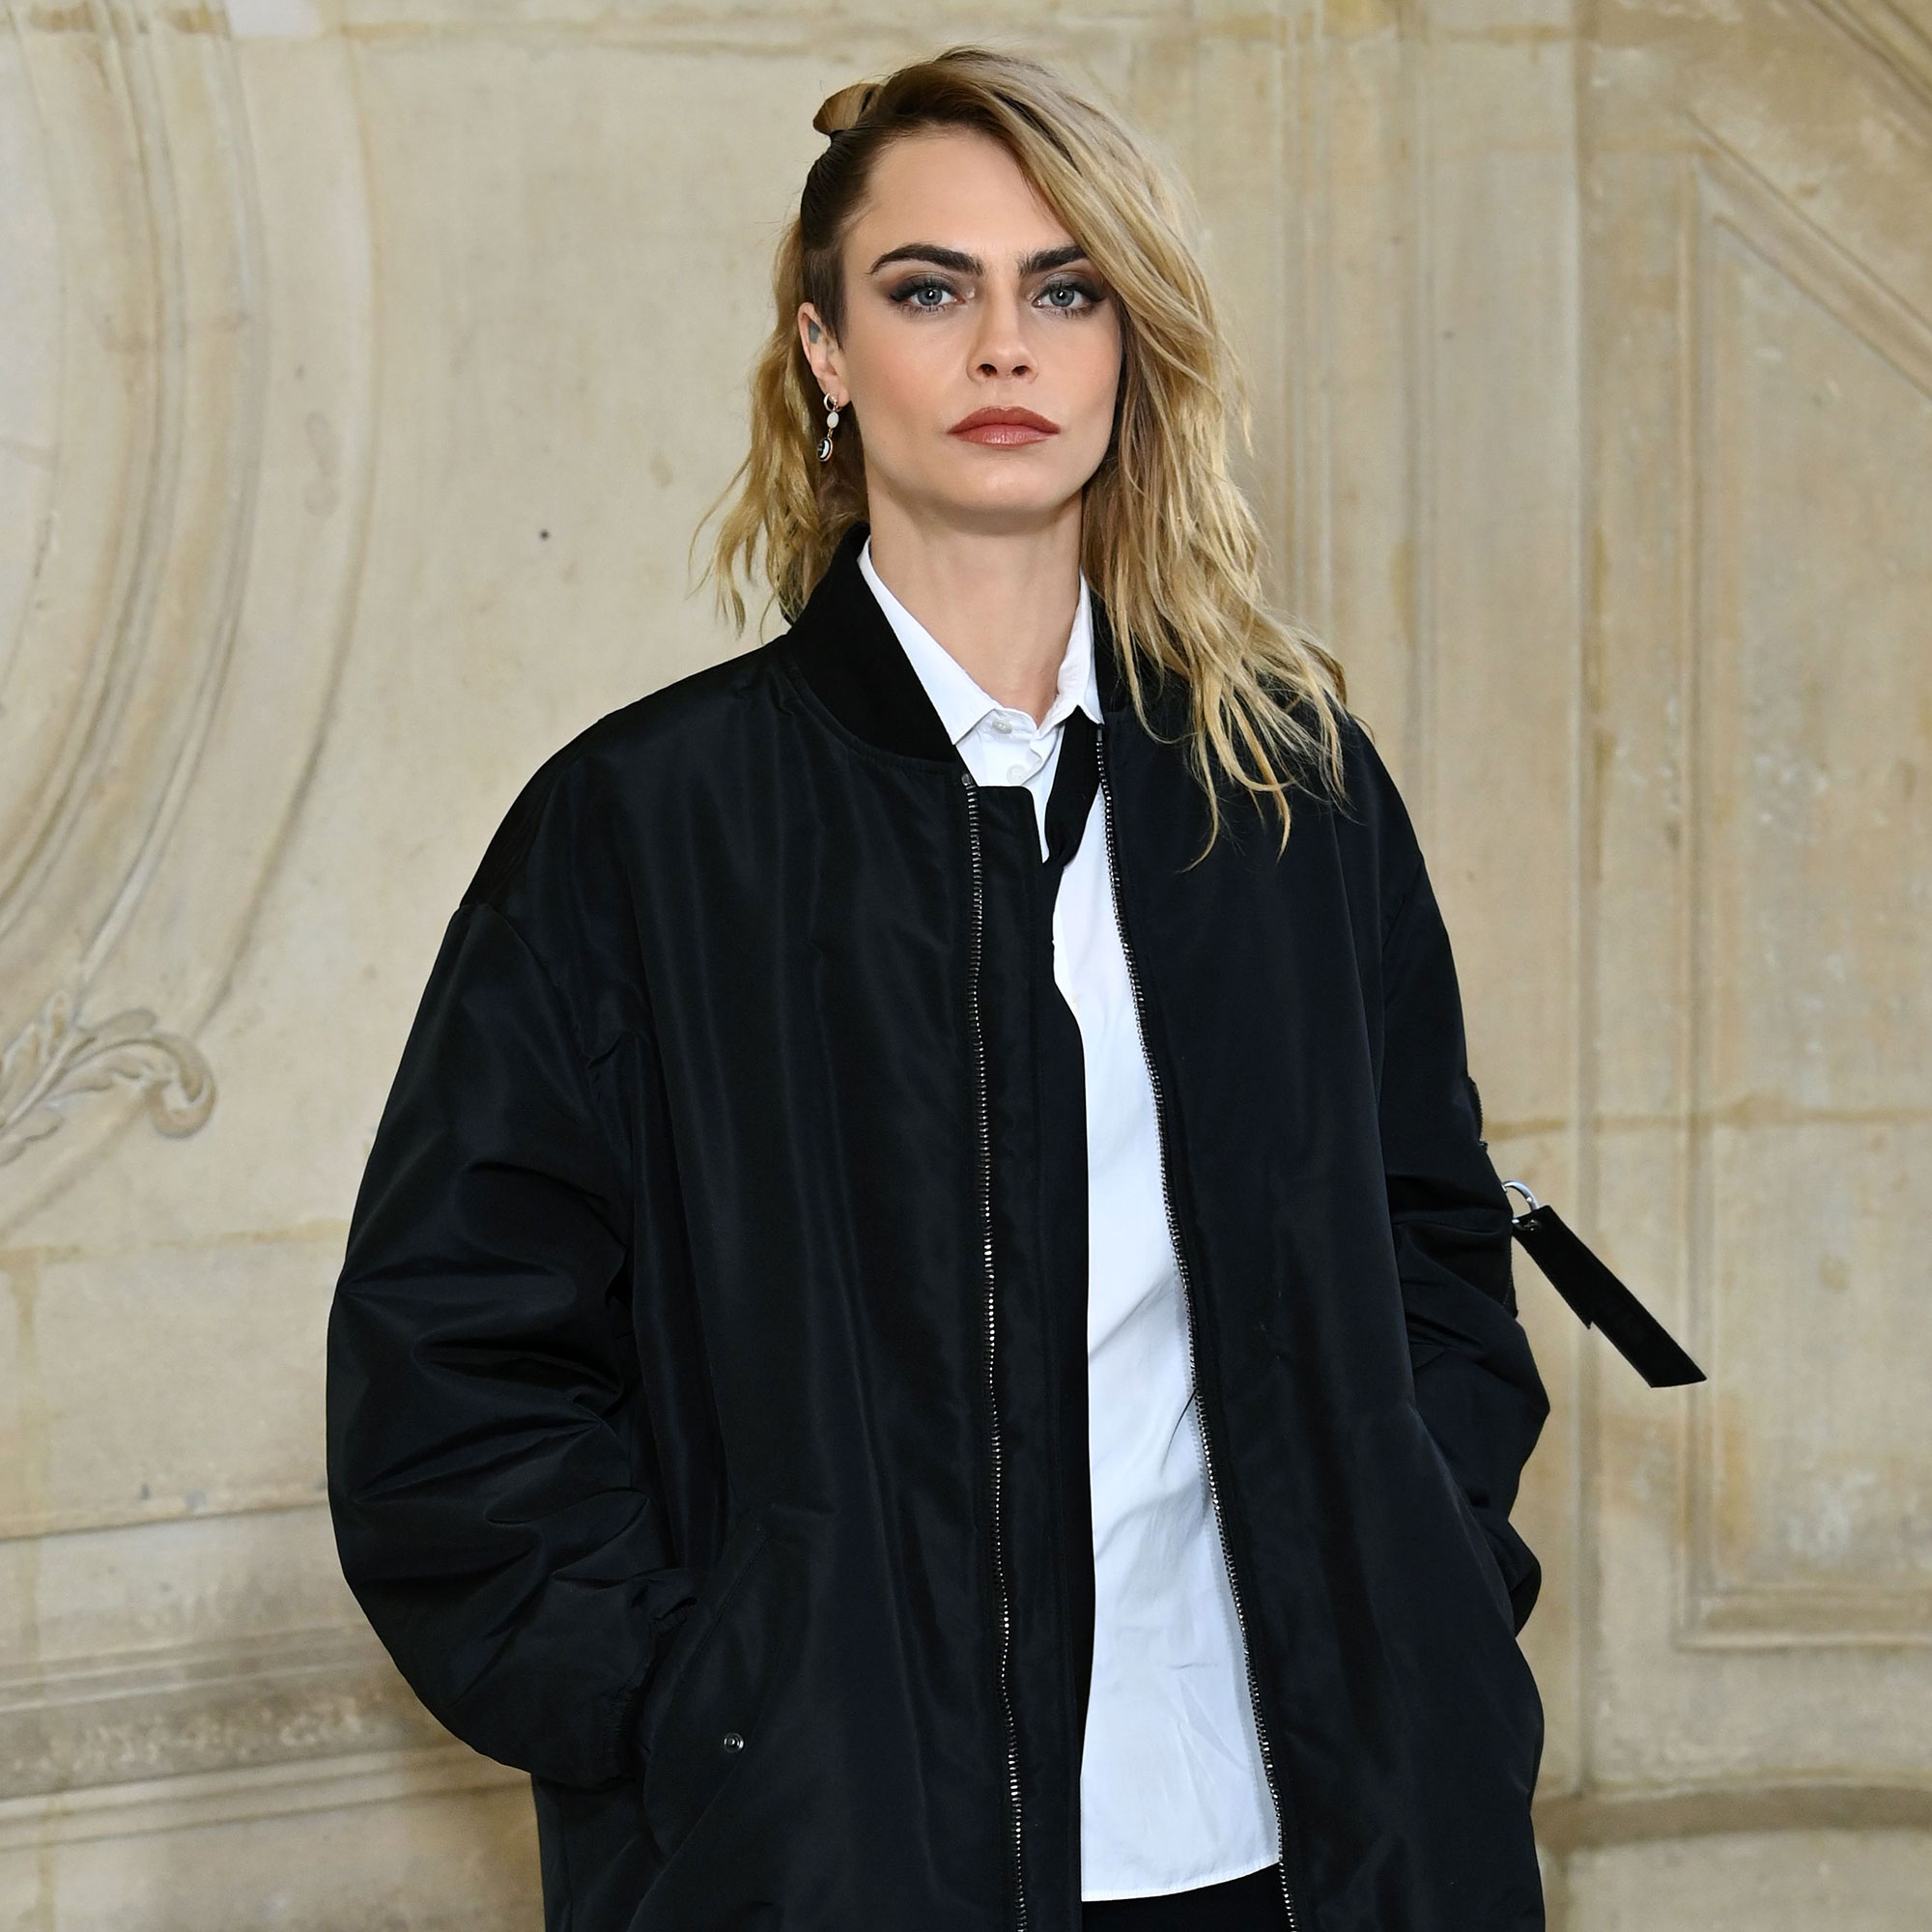 Cara Delevingne, Singer Minke Make Out in Italy: See Steamy Pics